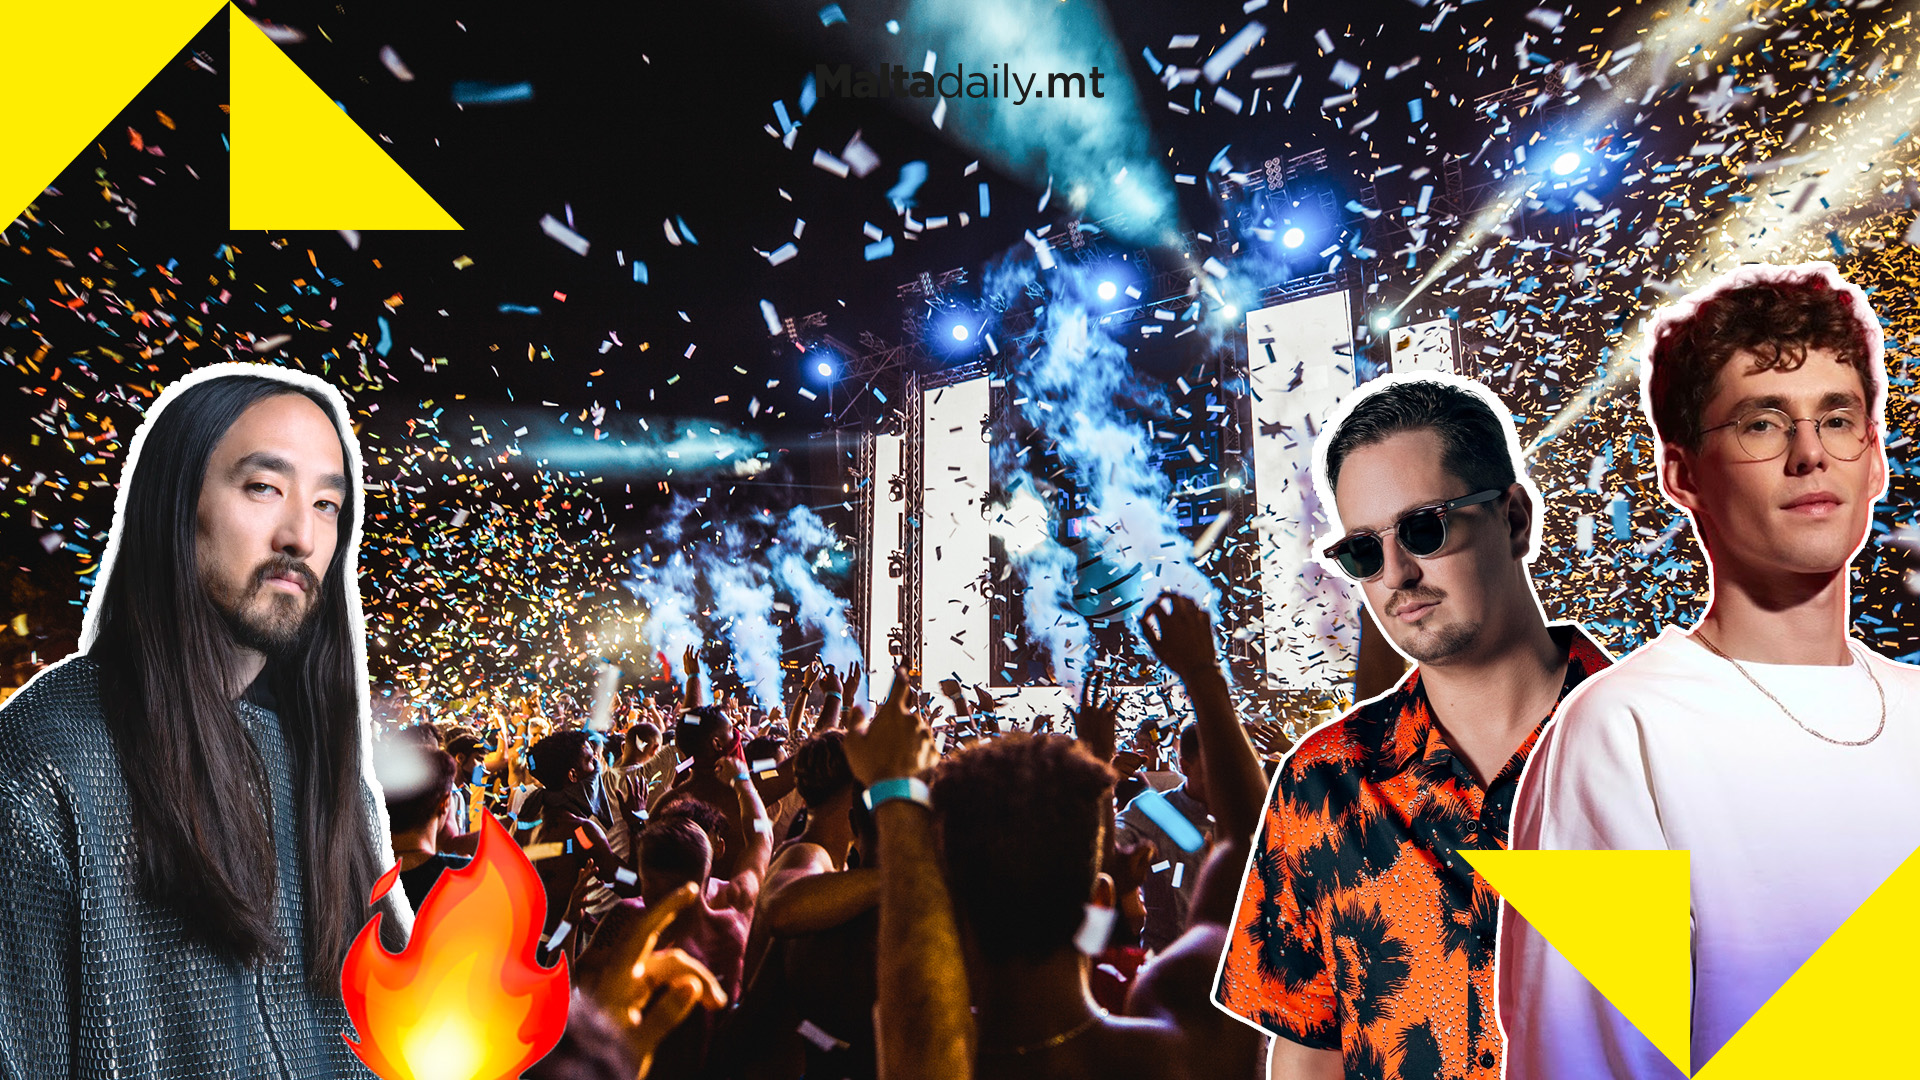 DJ line-up reveal for World Club Dome Malta including Steve Aoki, Lost Frequencies & more